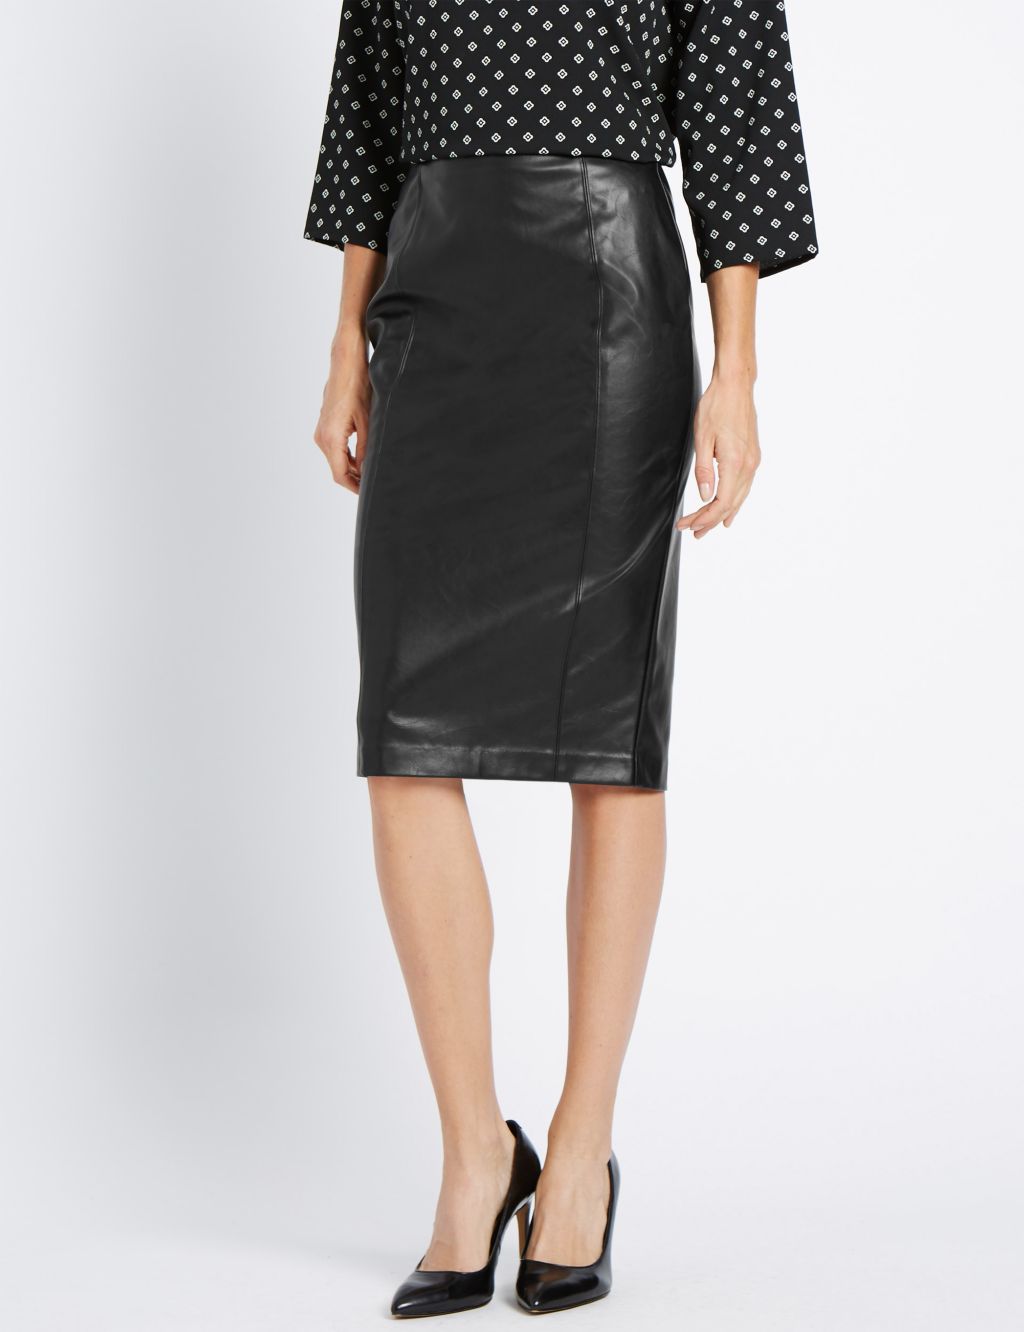 Back Zipped Pencil Skirt | M&S Collection | M&S